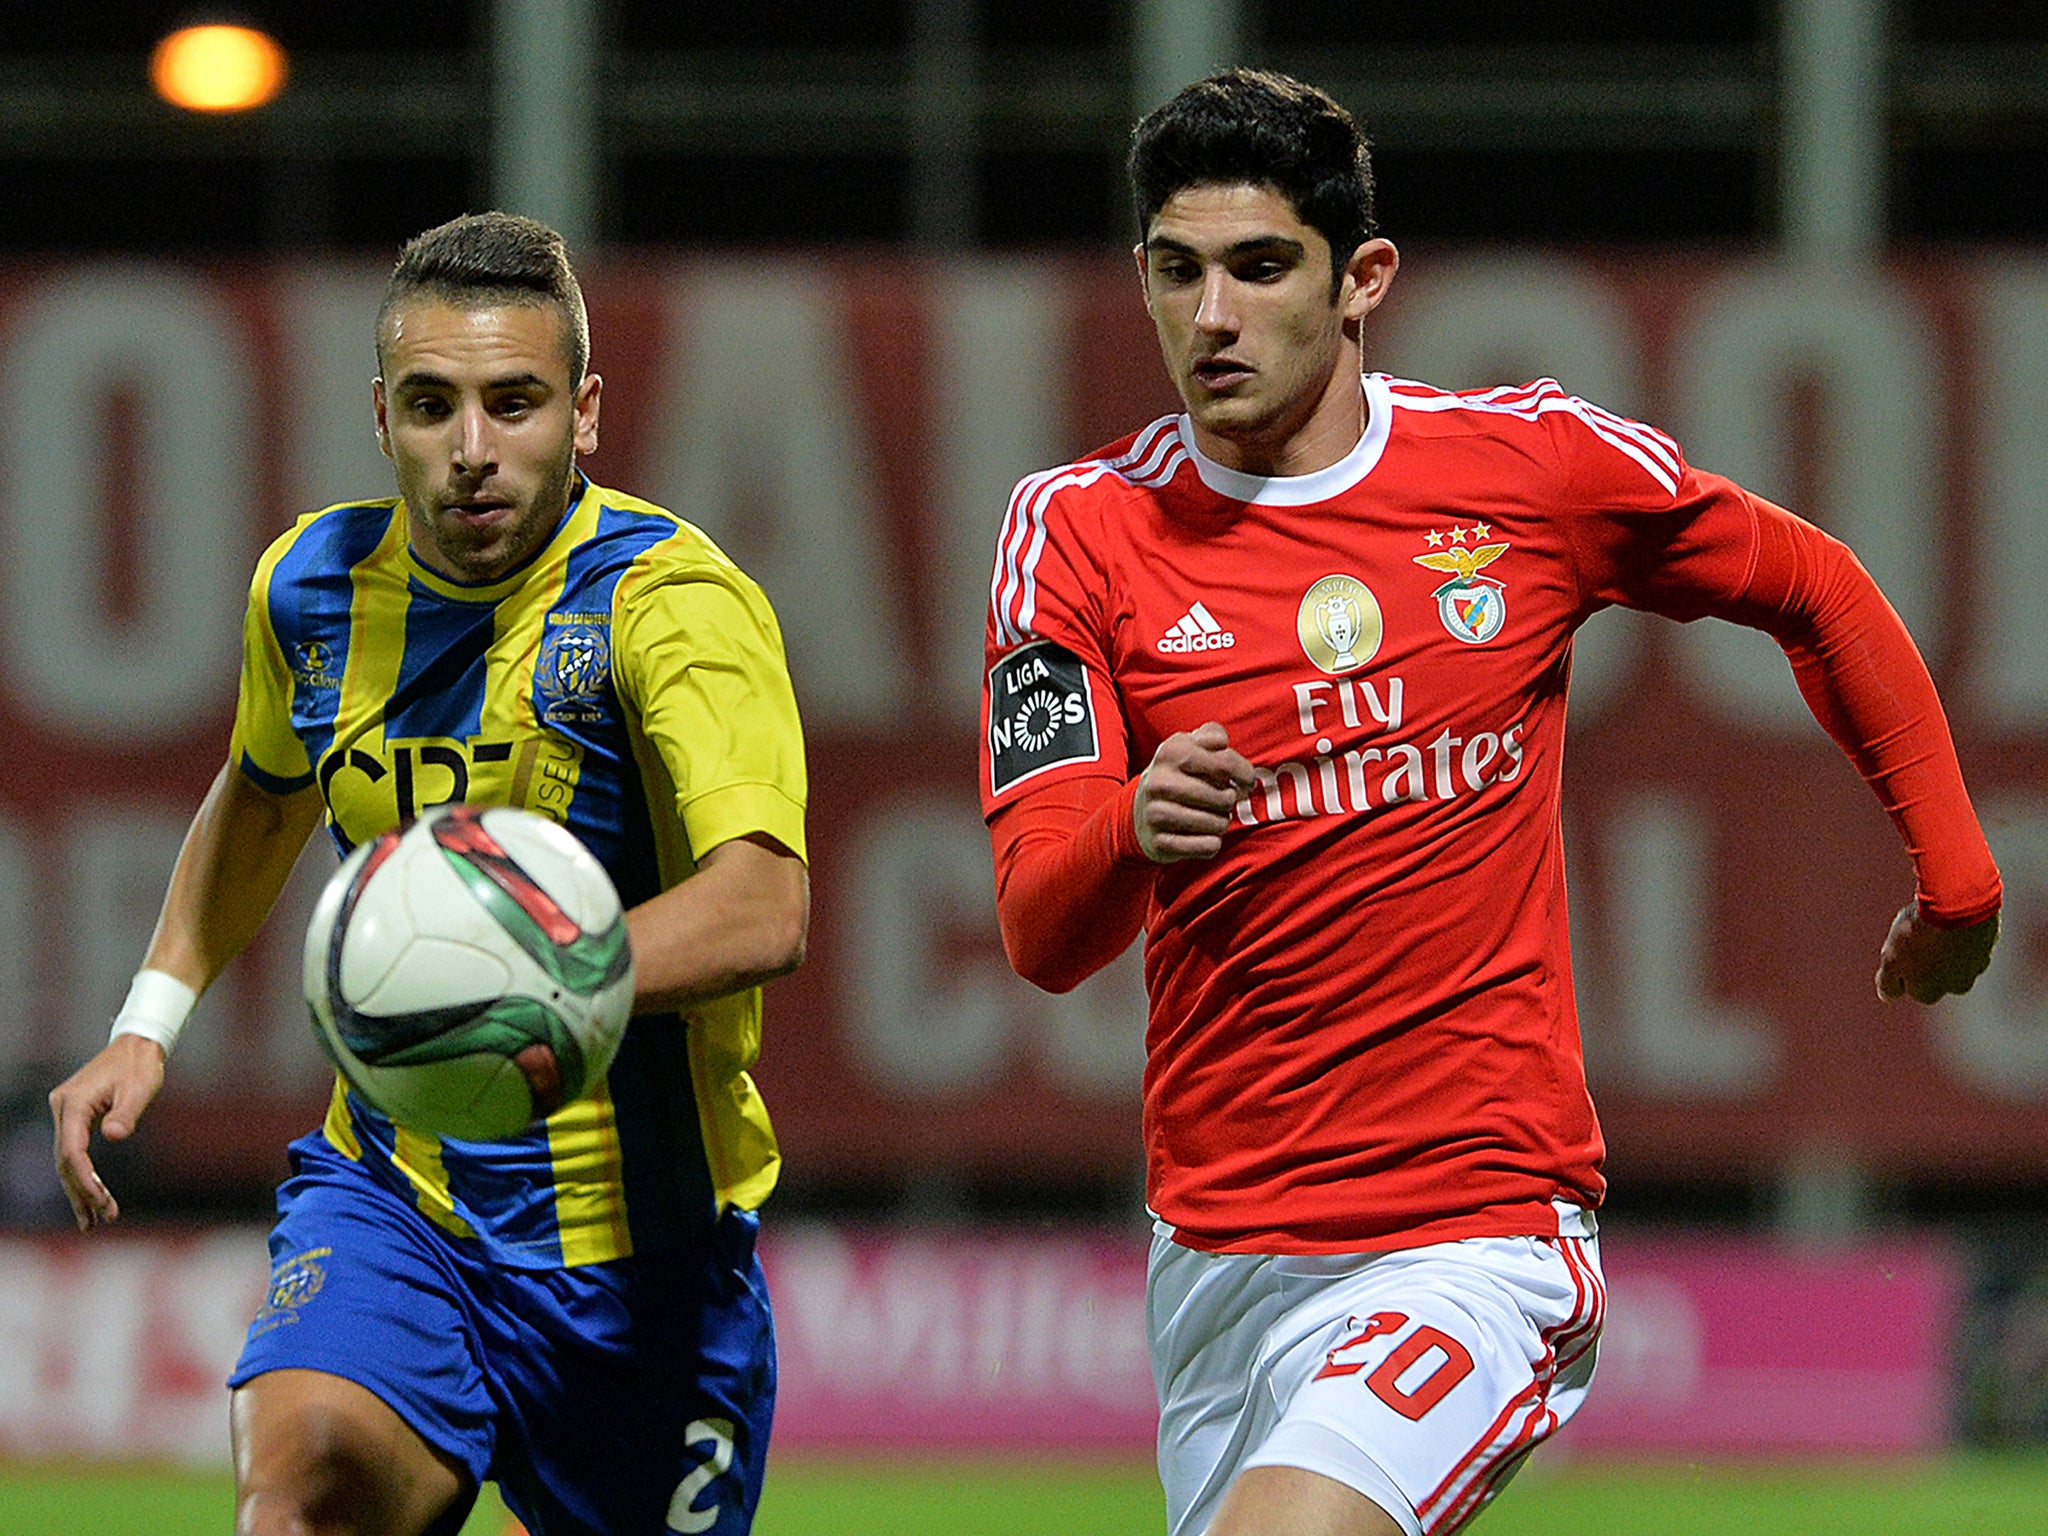 Benfica midfielder Goncalo Guedes